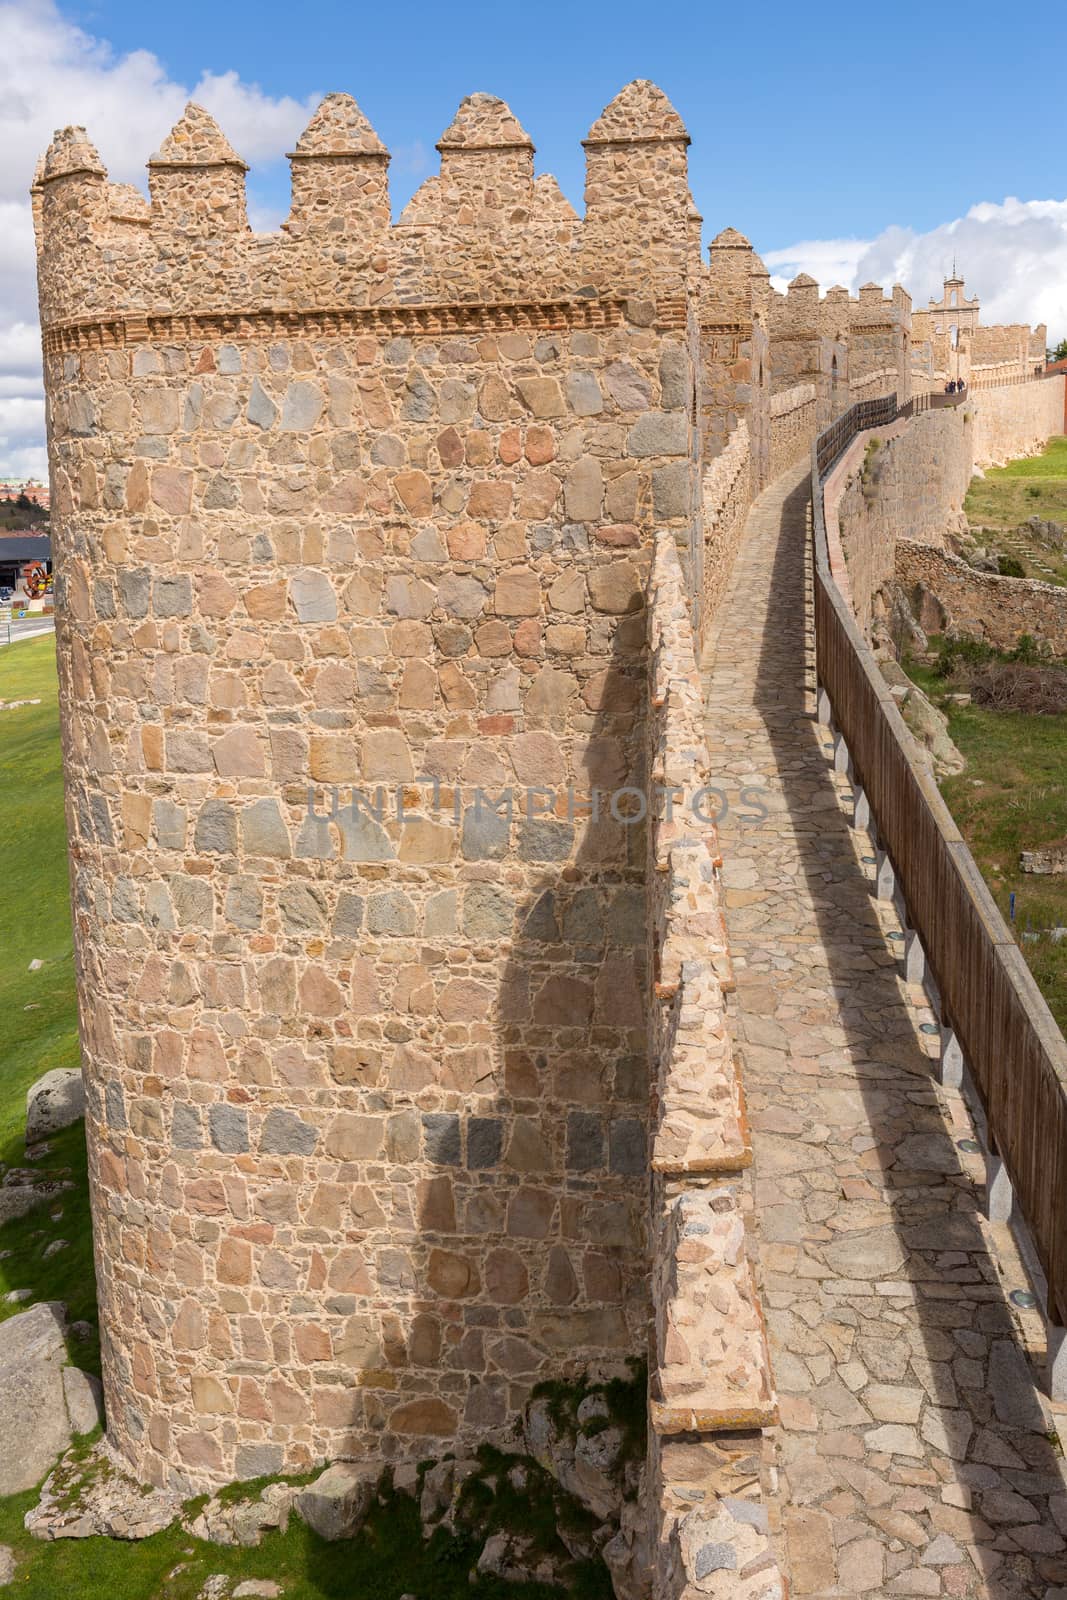 Ancient fortification of Avila, from the top of the walls, Castile and Leon, Spain